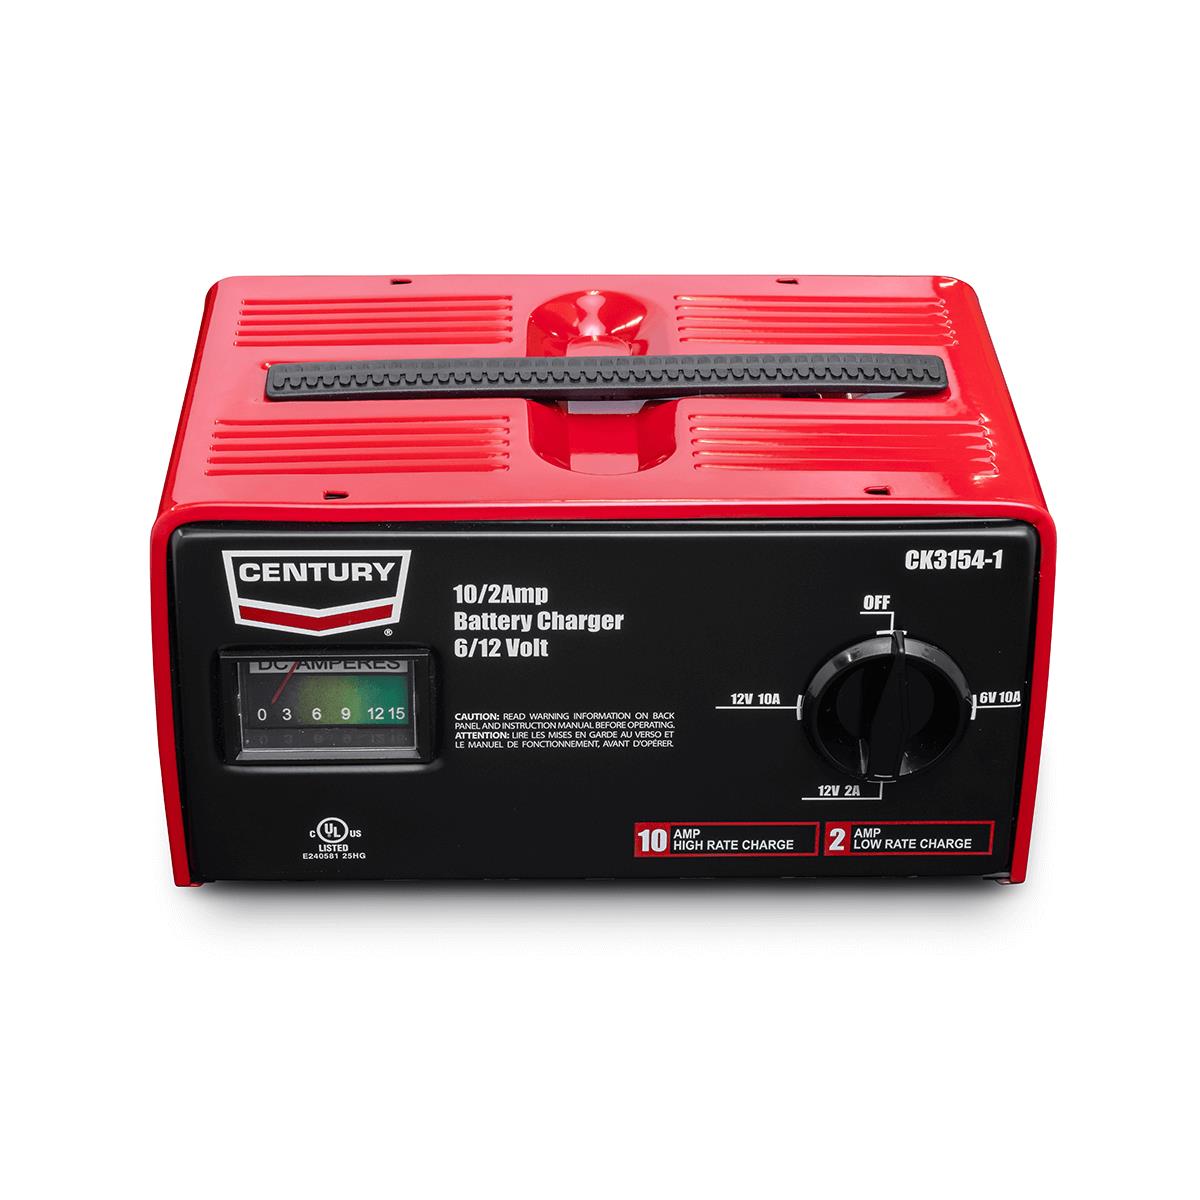 Century Manual Battery Charger - 10/2 Amp